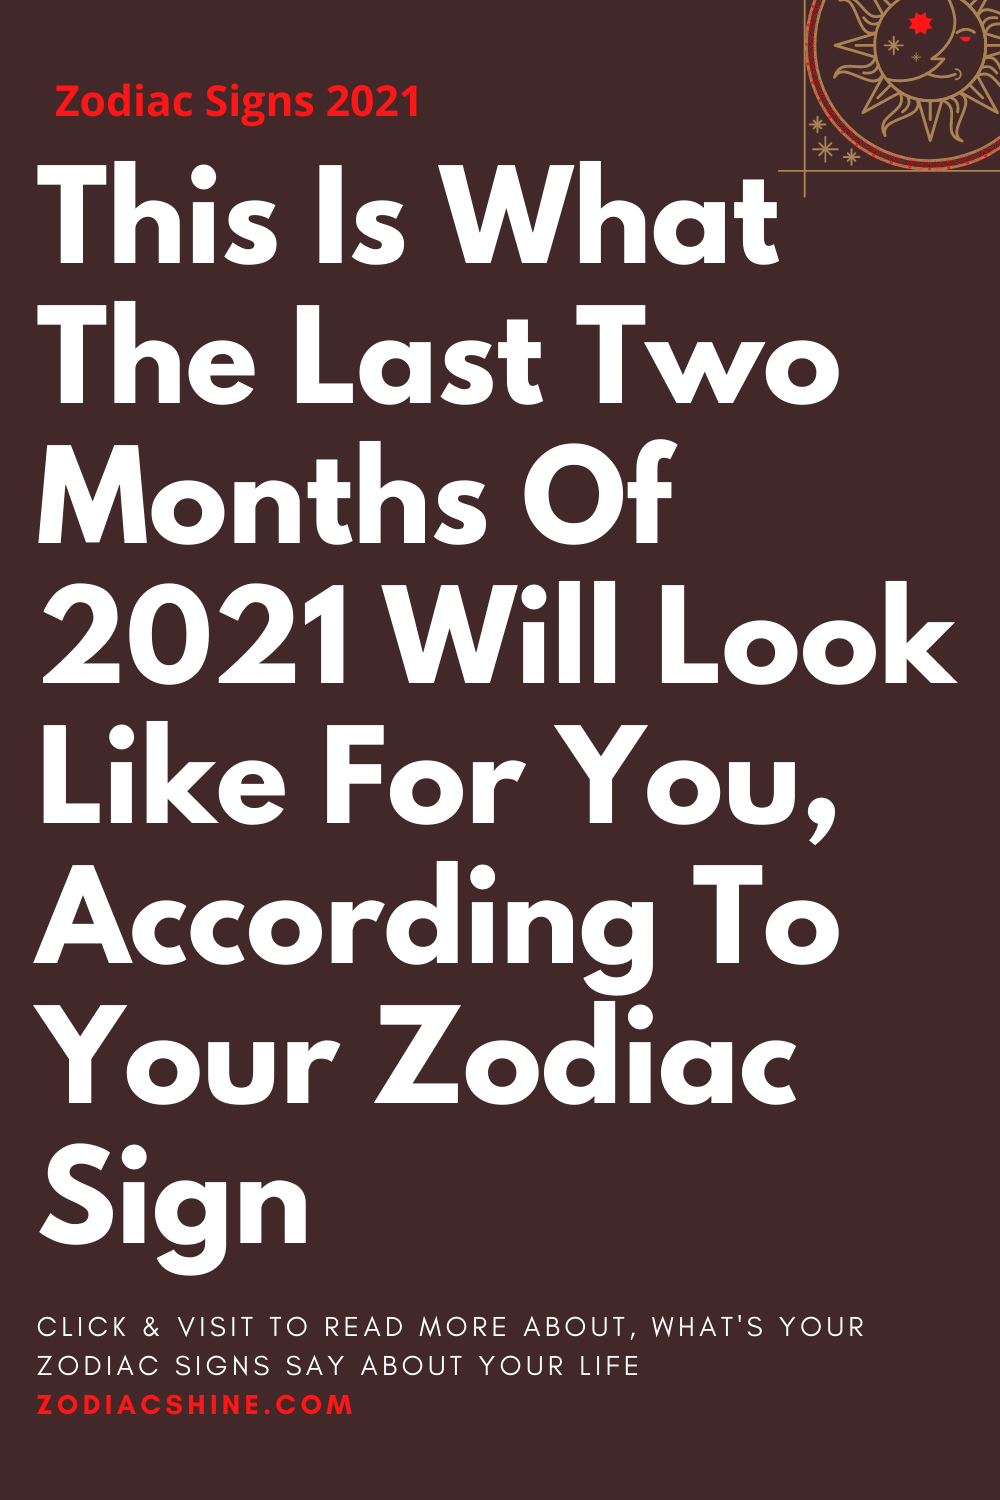 This Is What The Last Two Months Of 2021 Will Look Like For You According To Your Zodiac Sign